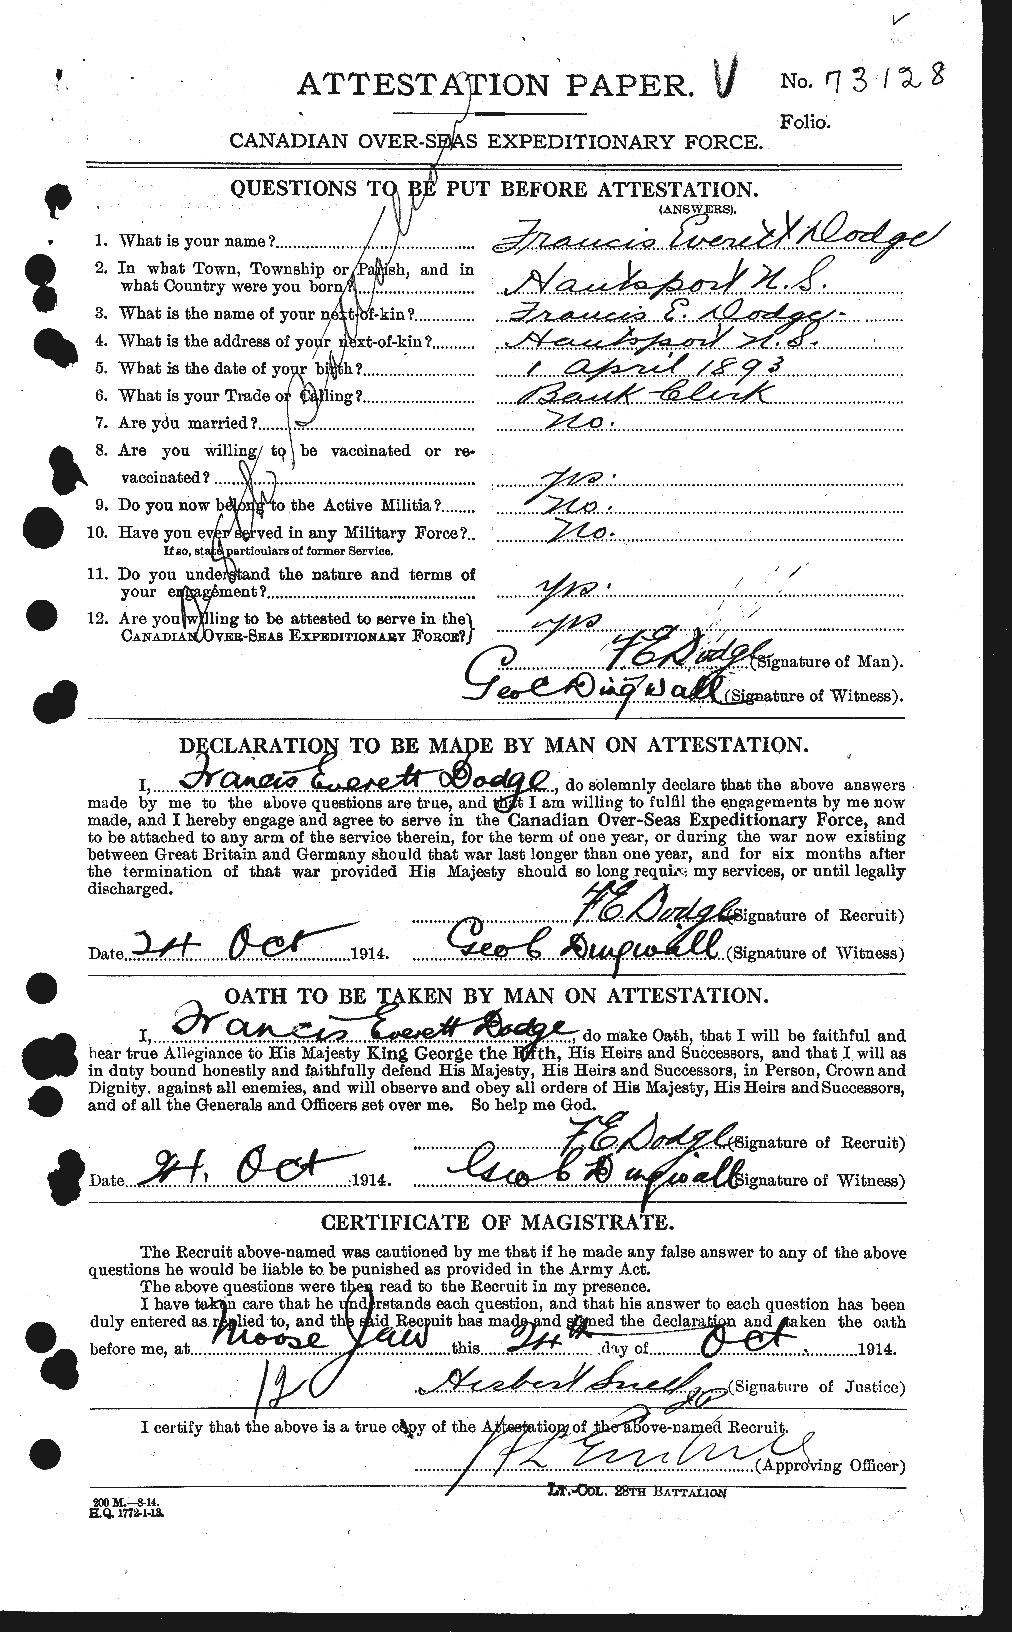 Personnel Records of the First World War - CEF 294465a